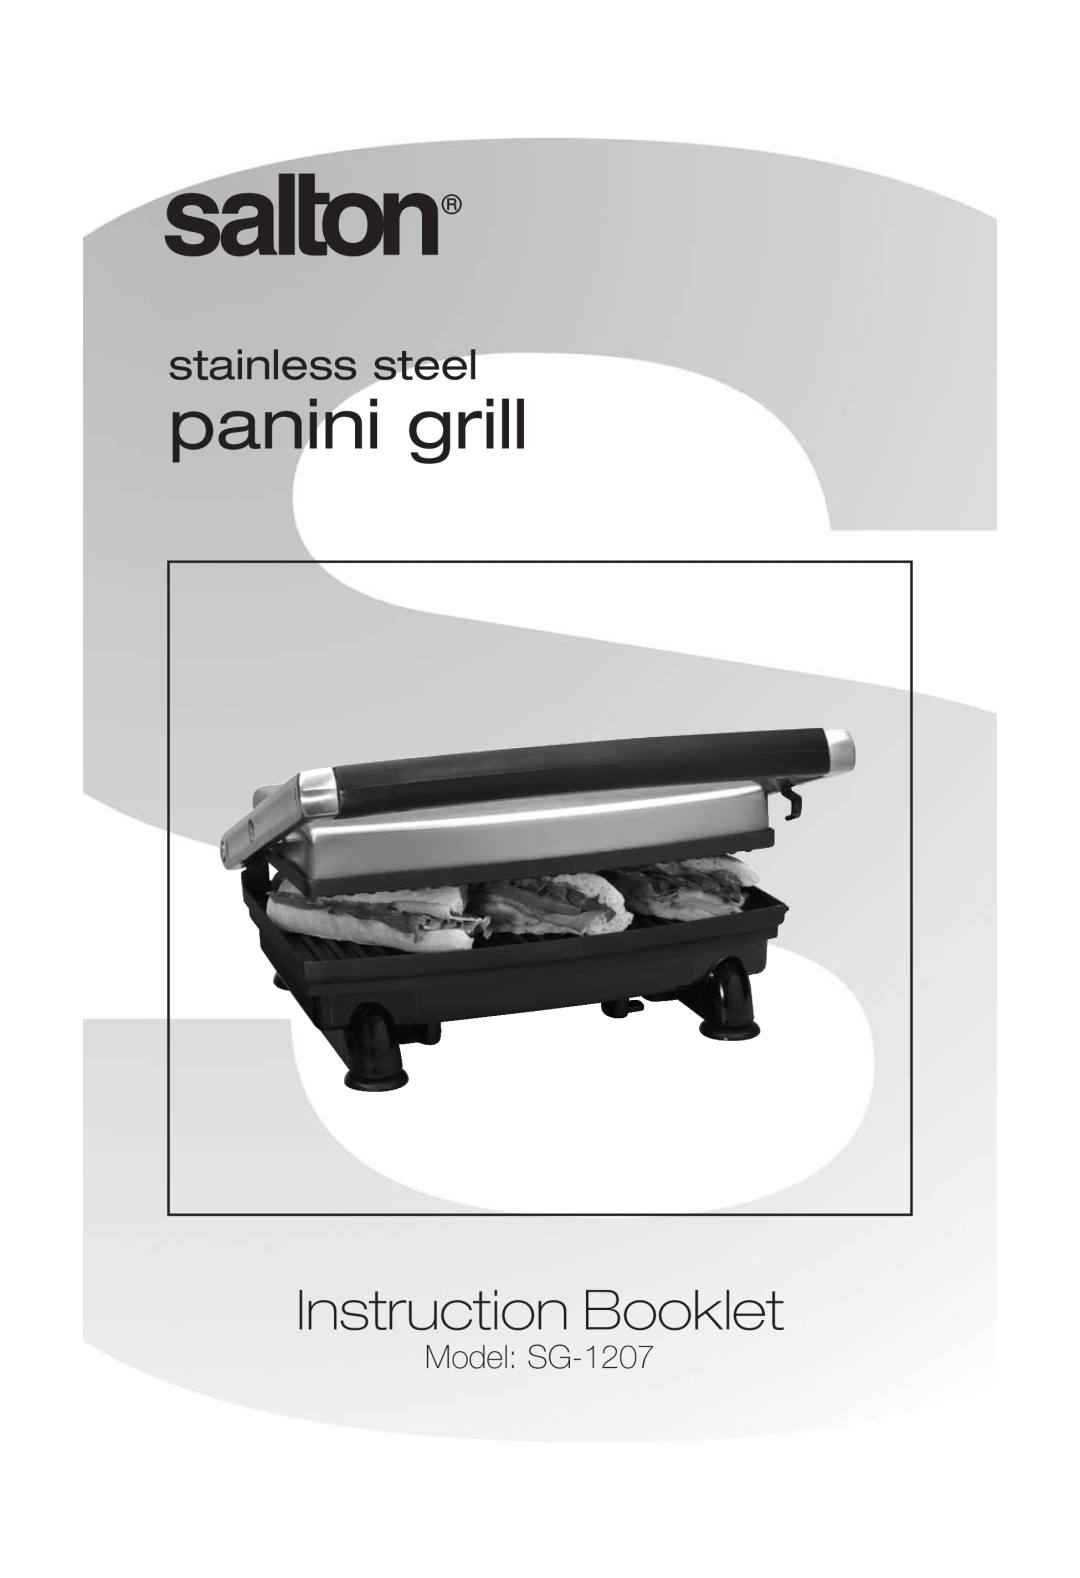 Salton manual Model SG-1207, panini grill, Instruction Booklet, stainless steel 